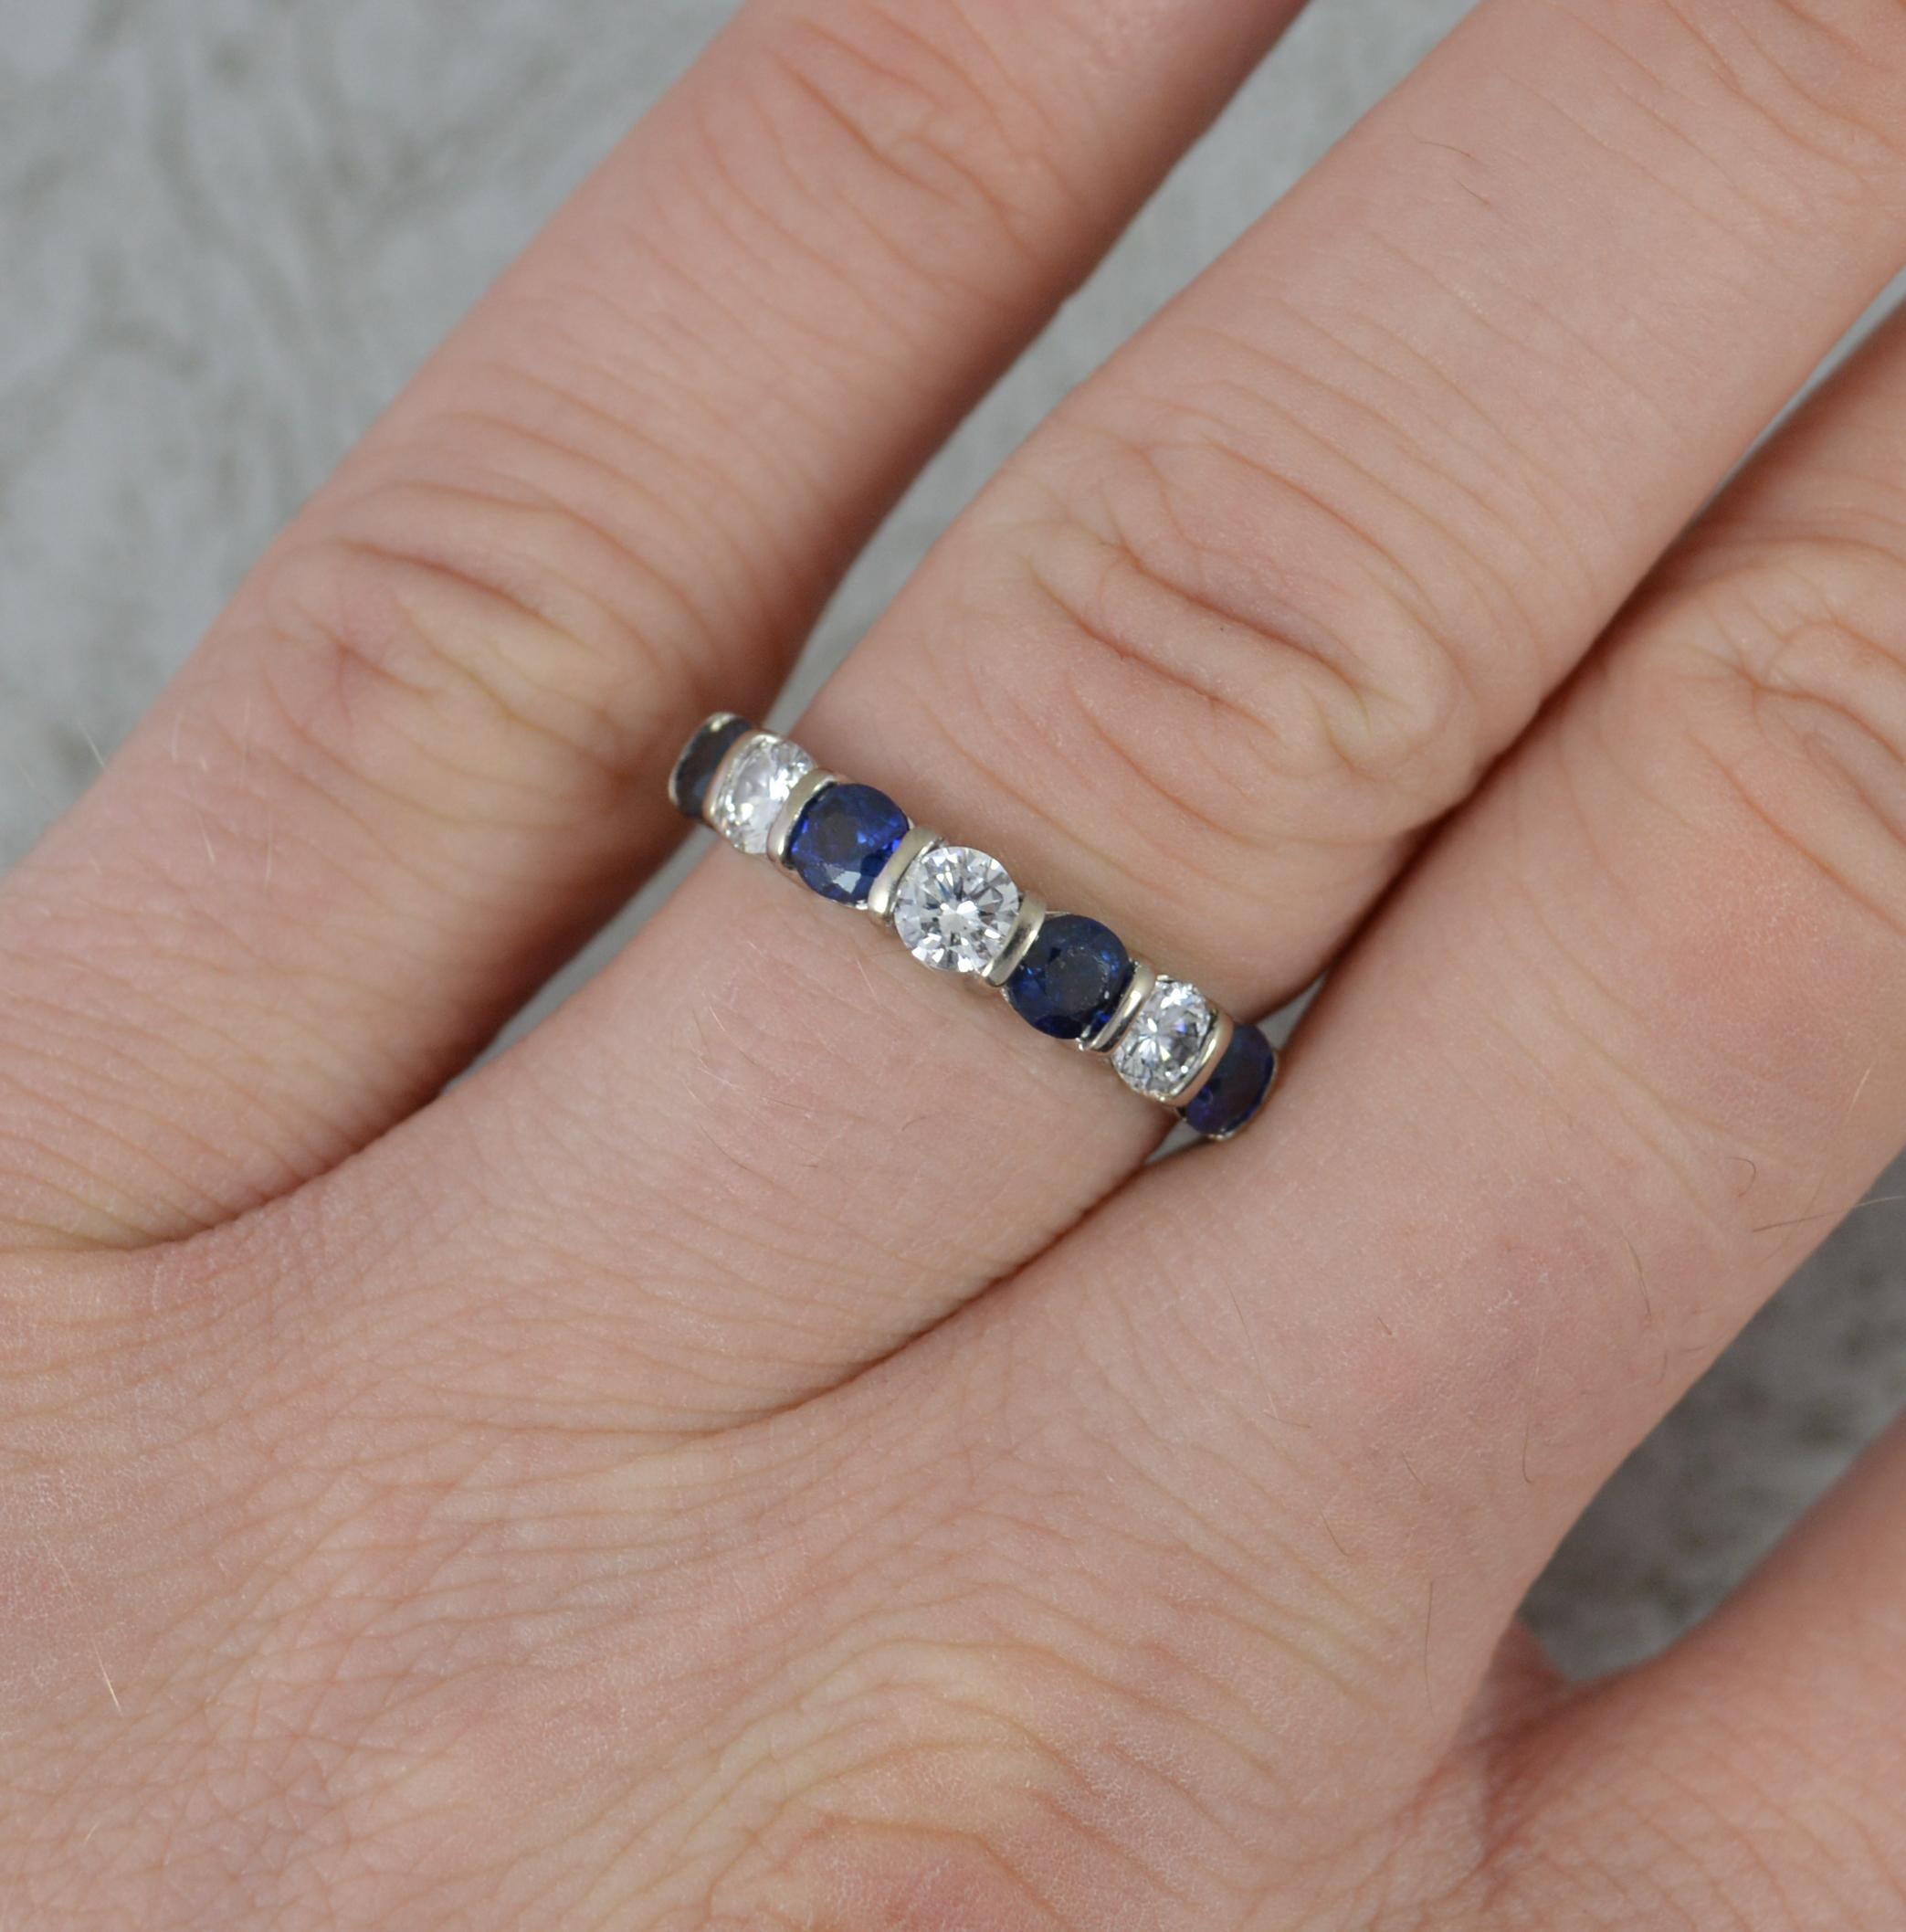 A very fine sapphire and diamond stack ring by Boodles.
Solid 18 carat white gold example.
Set with alternating round brilliant cut diamonds in tension settings. 3.6-3.7mm diameter stones. 0.6ct diamond total. Wonderful, sparkly example.
21mm spread